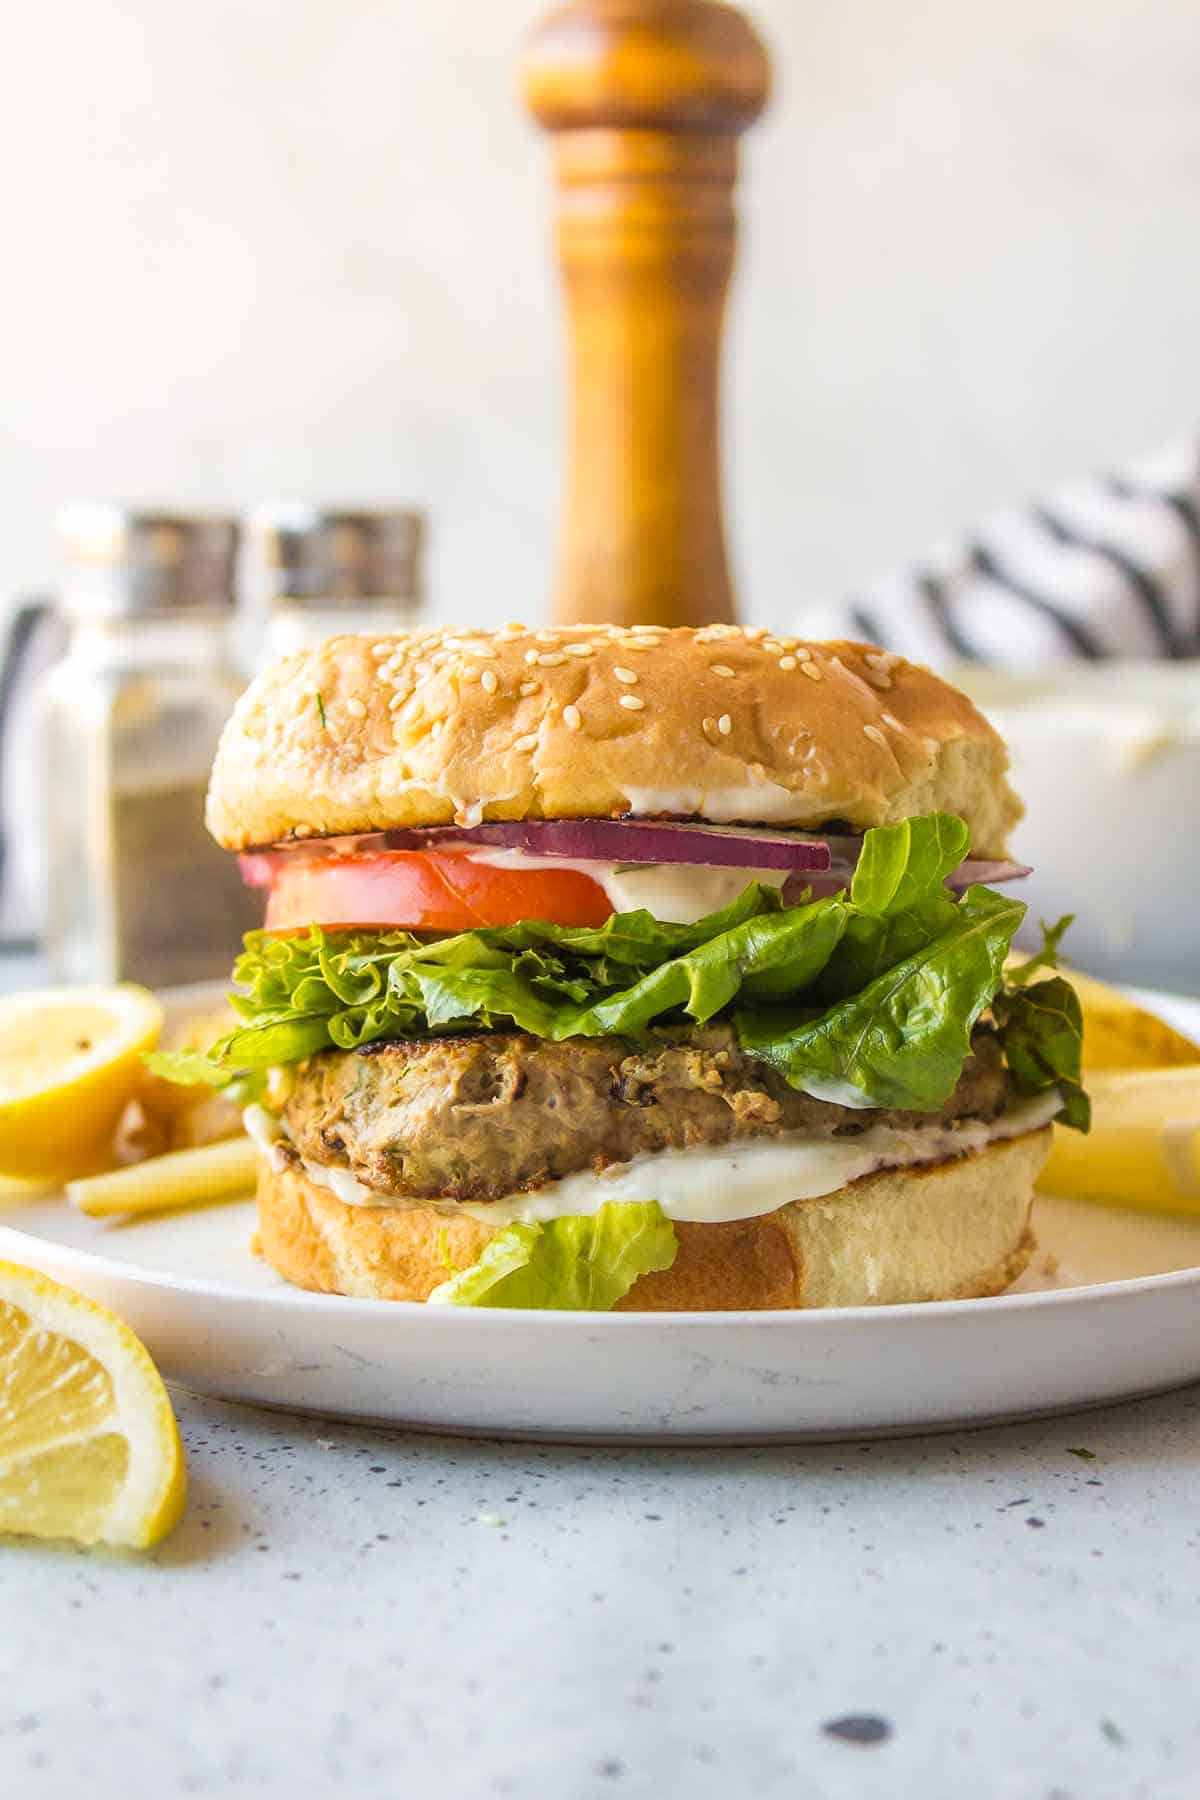 Greek Burger with Tzatziki sauce, Lettuce, Tomato and Red Onion